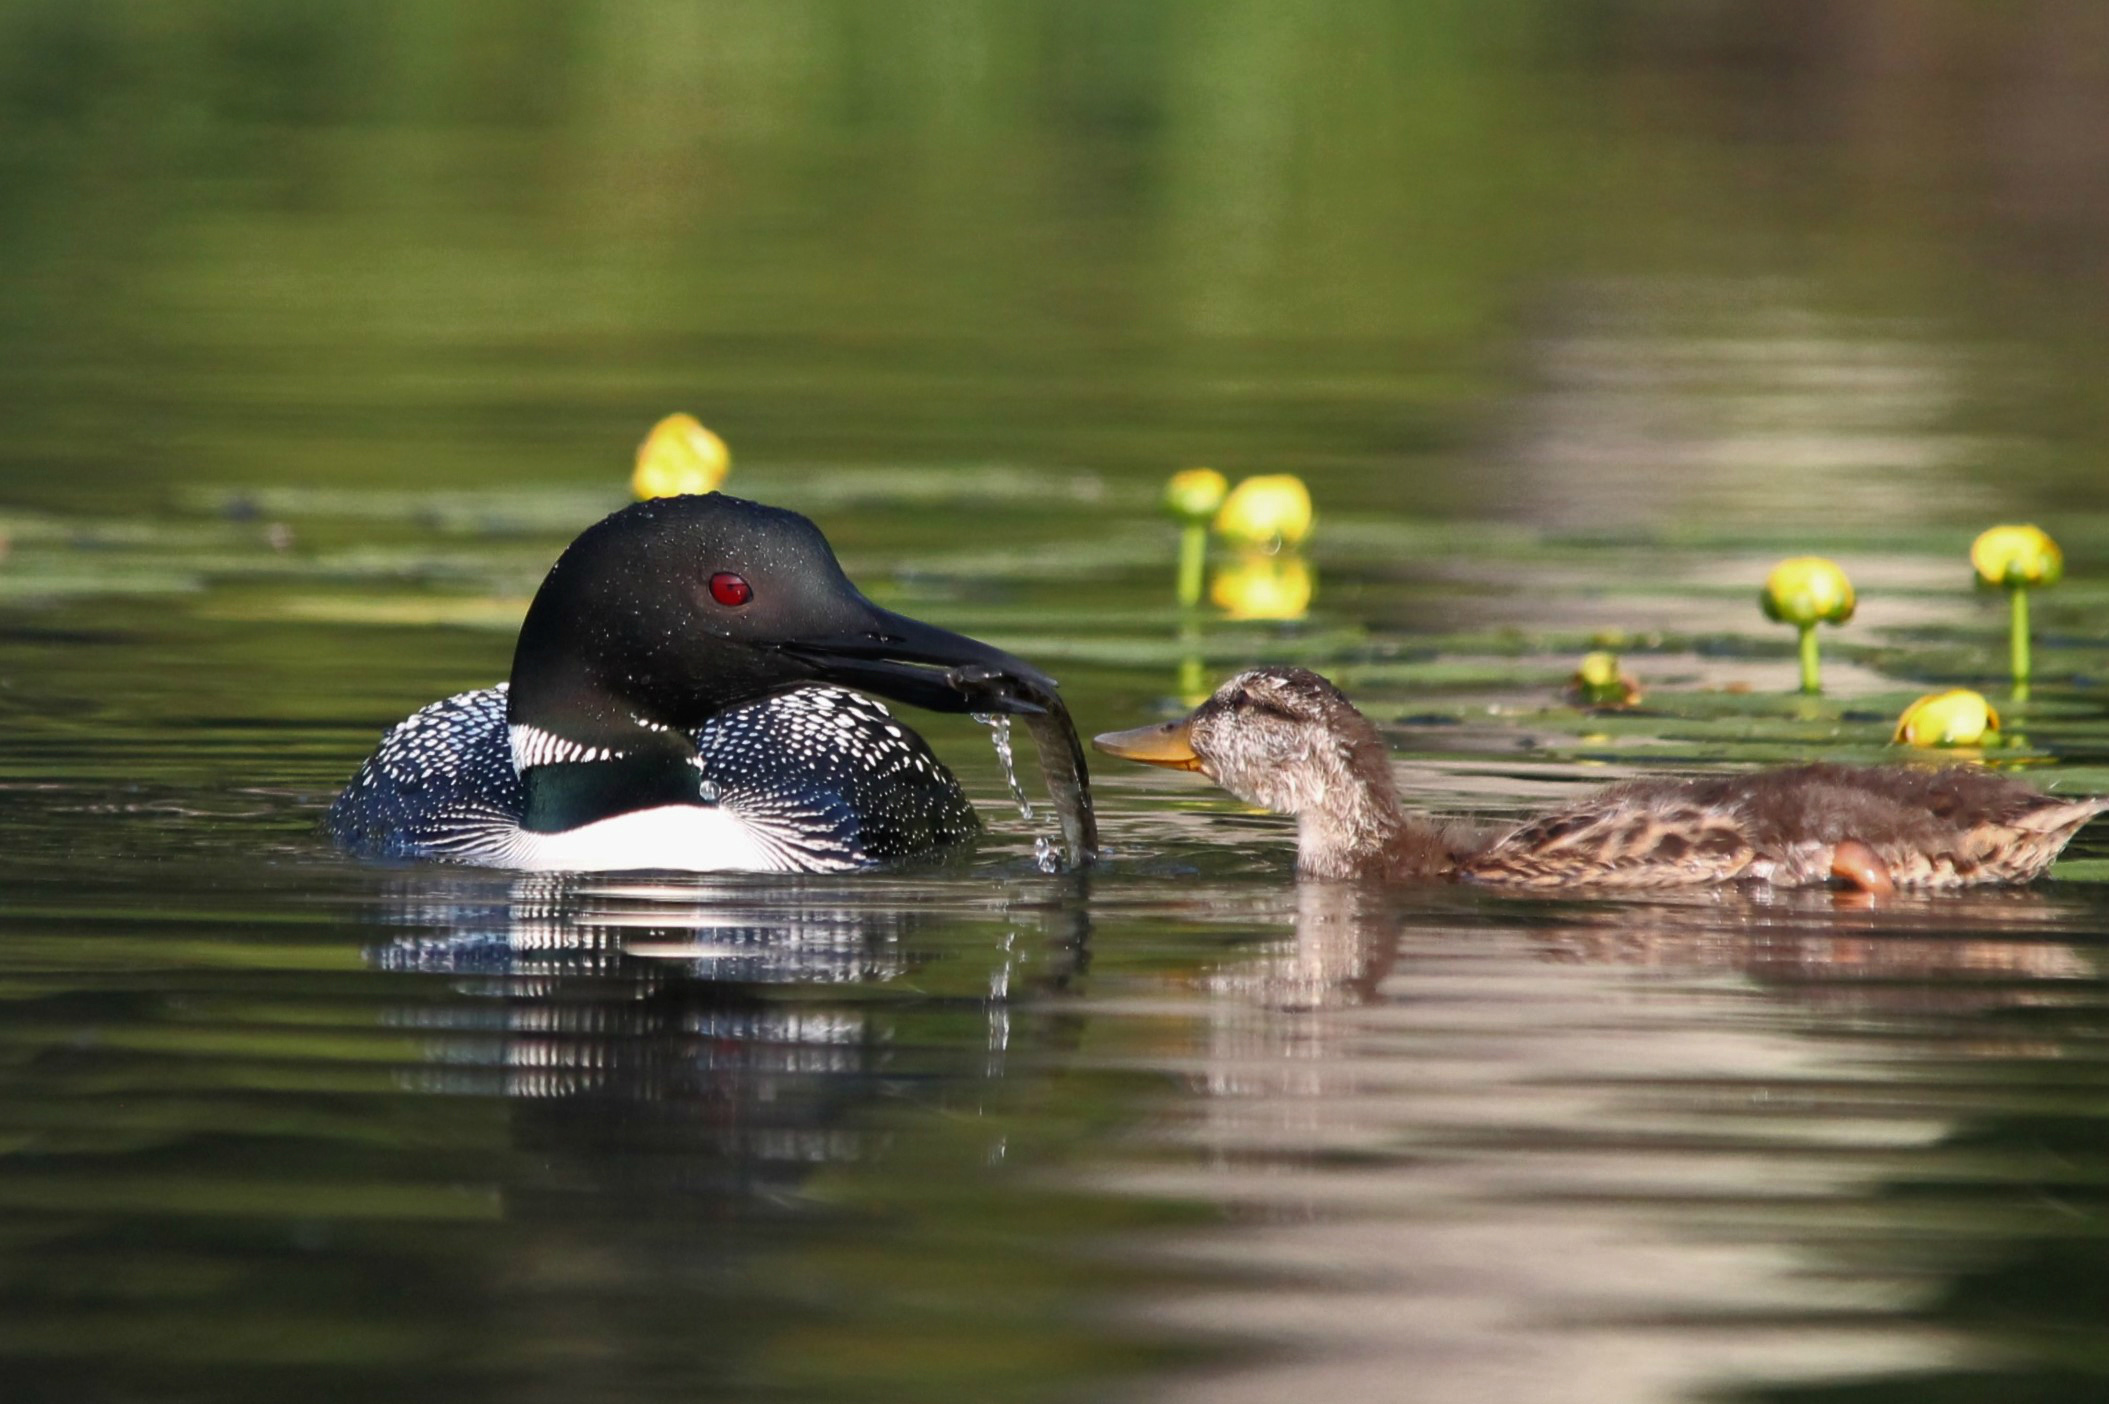 PHOTO: The loons have also taught the duckling how to dive for food and eat from their mouths, which is virtually unheard of for mallards.